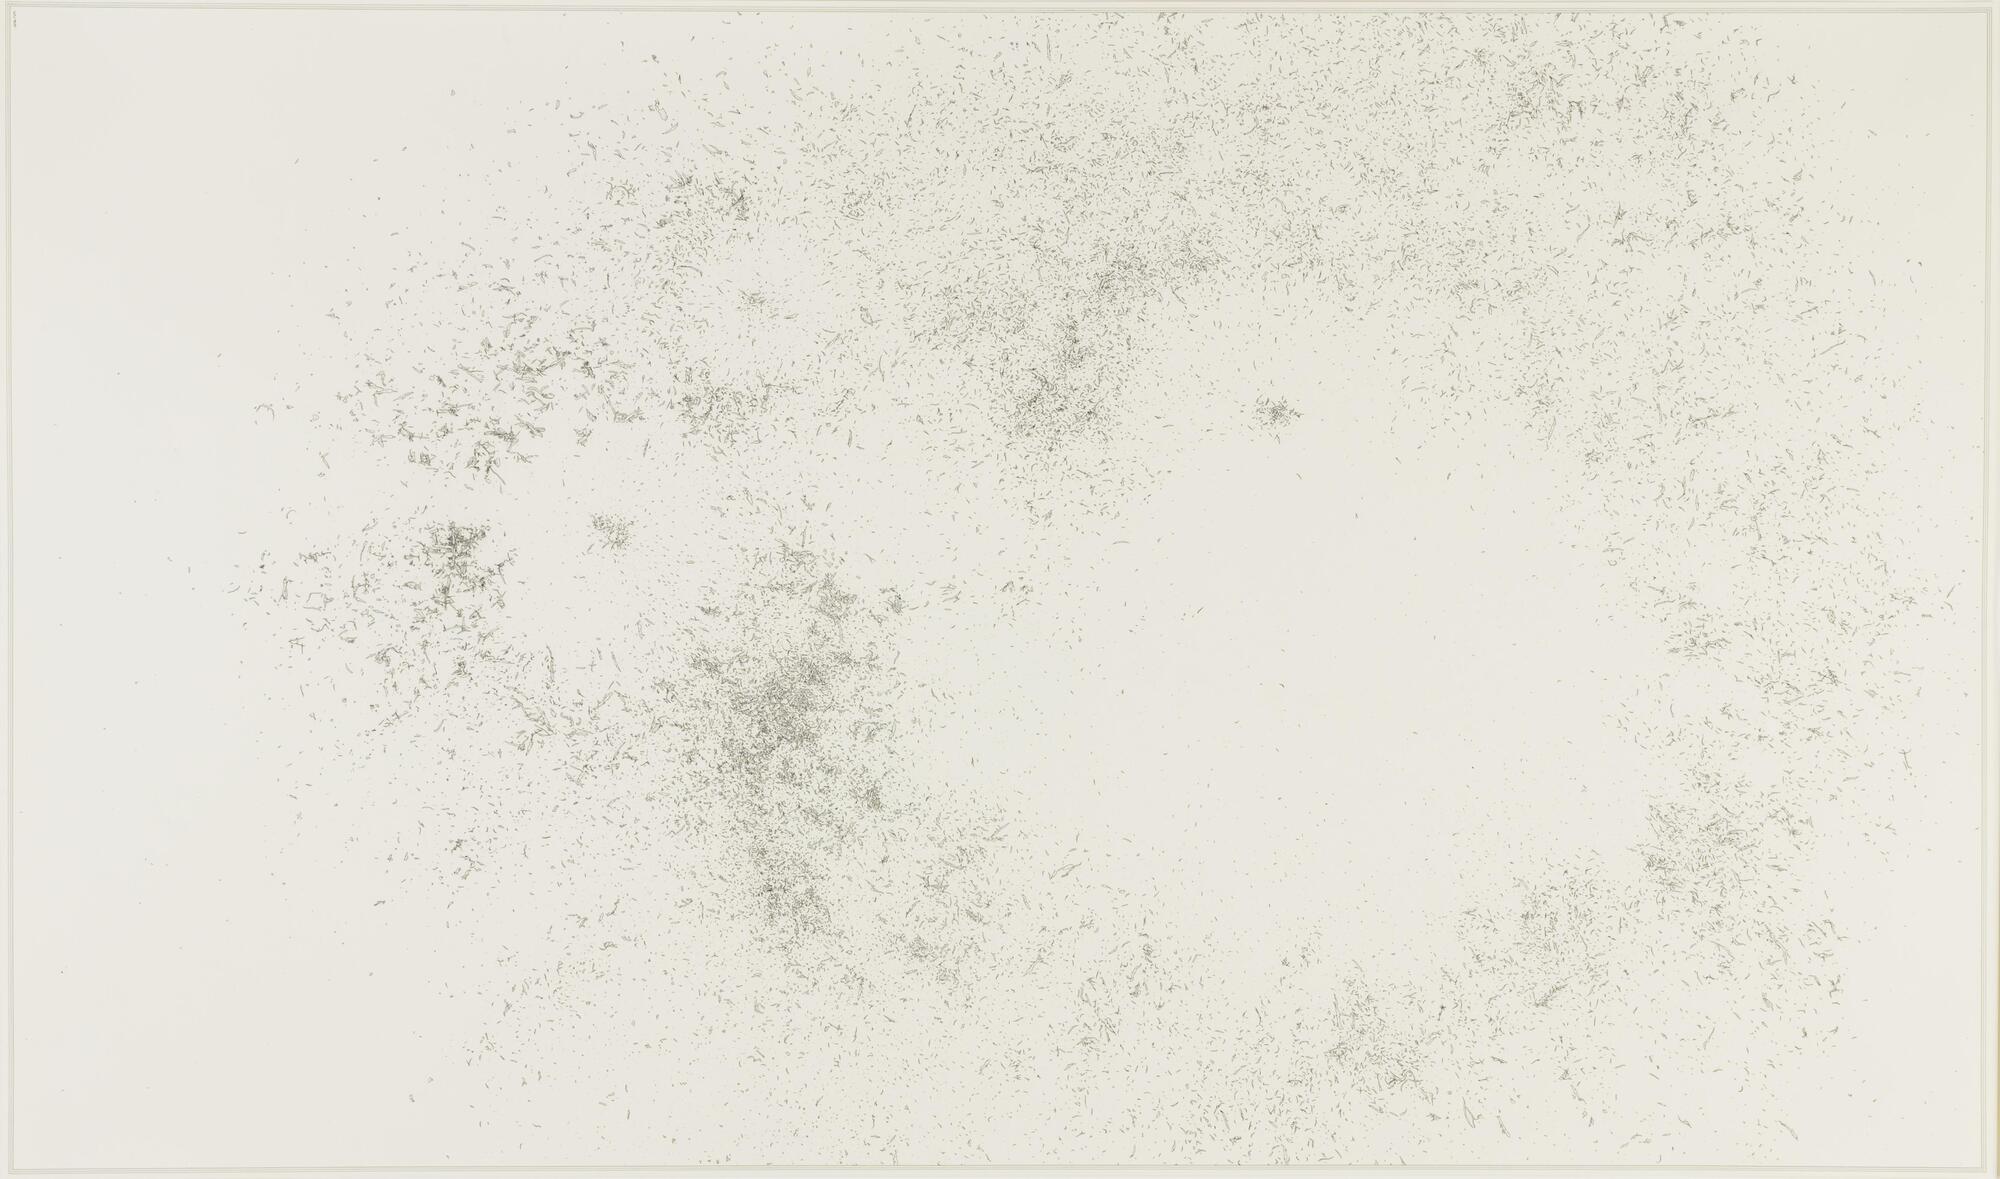 This drawing has a series of marks and small objects drawn into an amorphous shape of two spheres, one small, on the left and one larger, on the right. The print is signed and dated in pencil (u.l.) "EC 08".